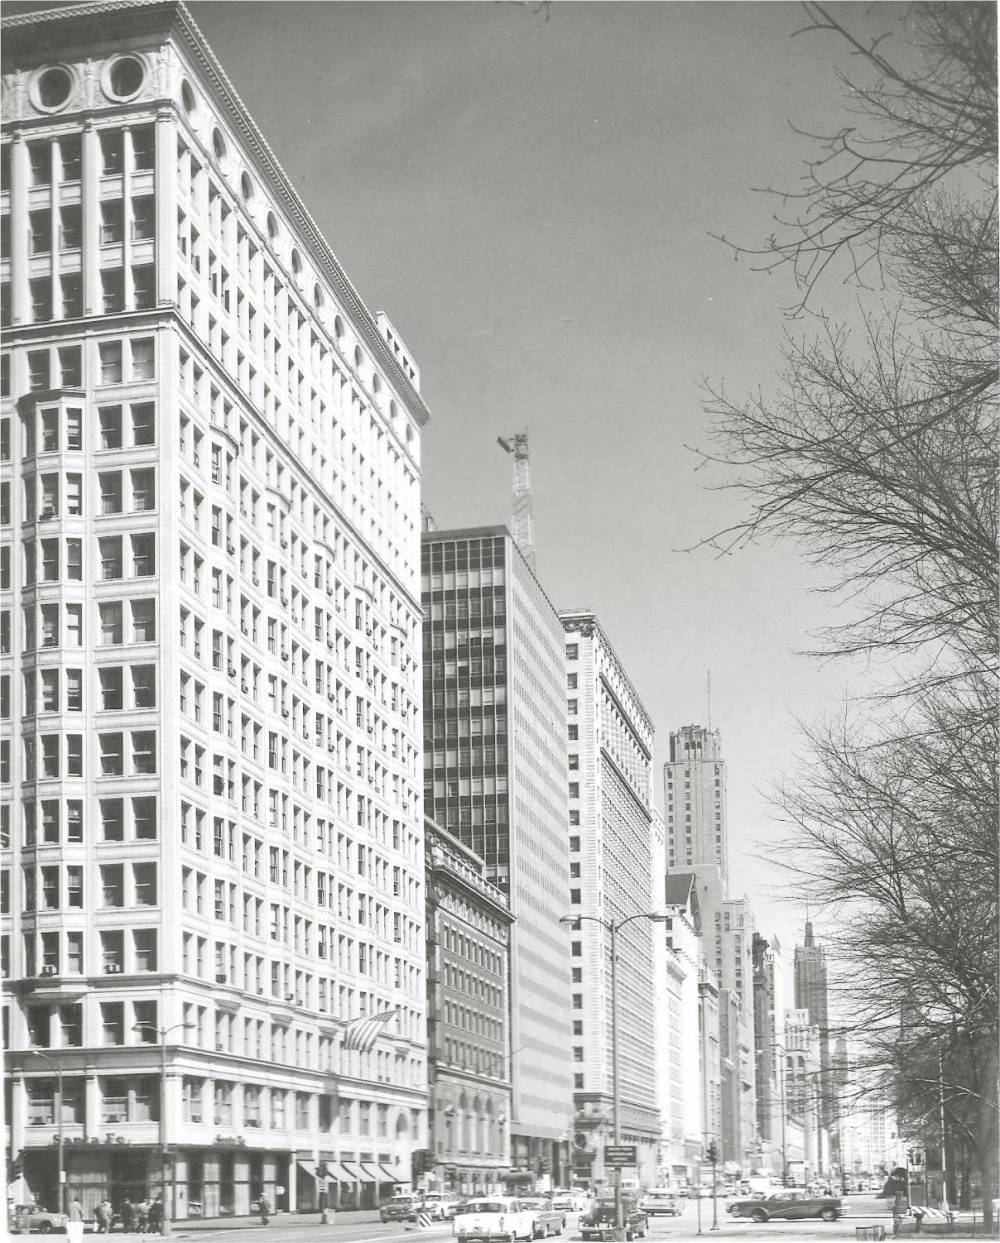 PHOTO - CHICAGO - MICHIGAN AVE - LOOKING SW - SANTA FE BUILDING ON LEFT - FORMER RAILWAY EXCHANGE - NOTE INDIVIDUAL AIR CONDITIONERS - c1960